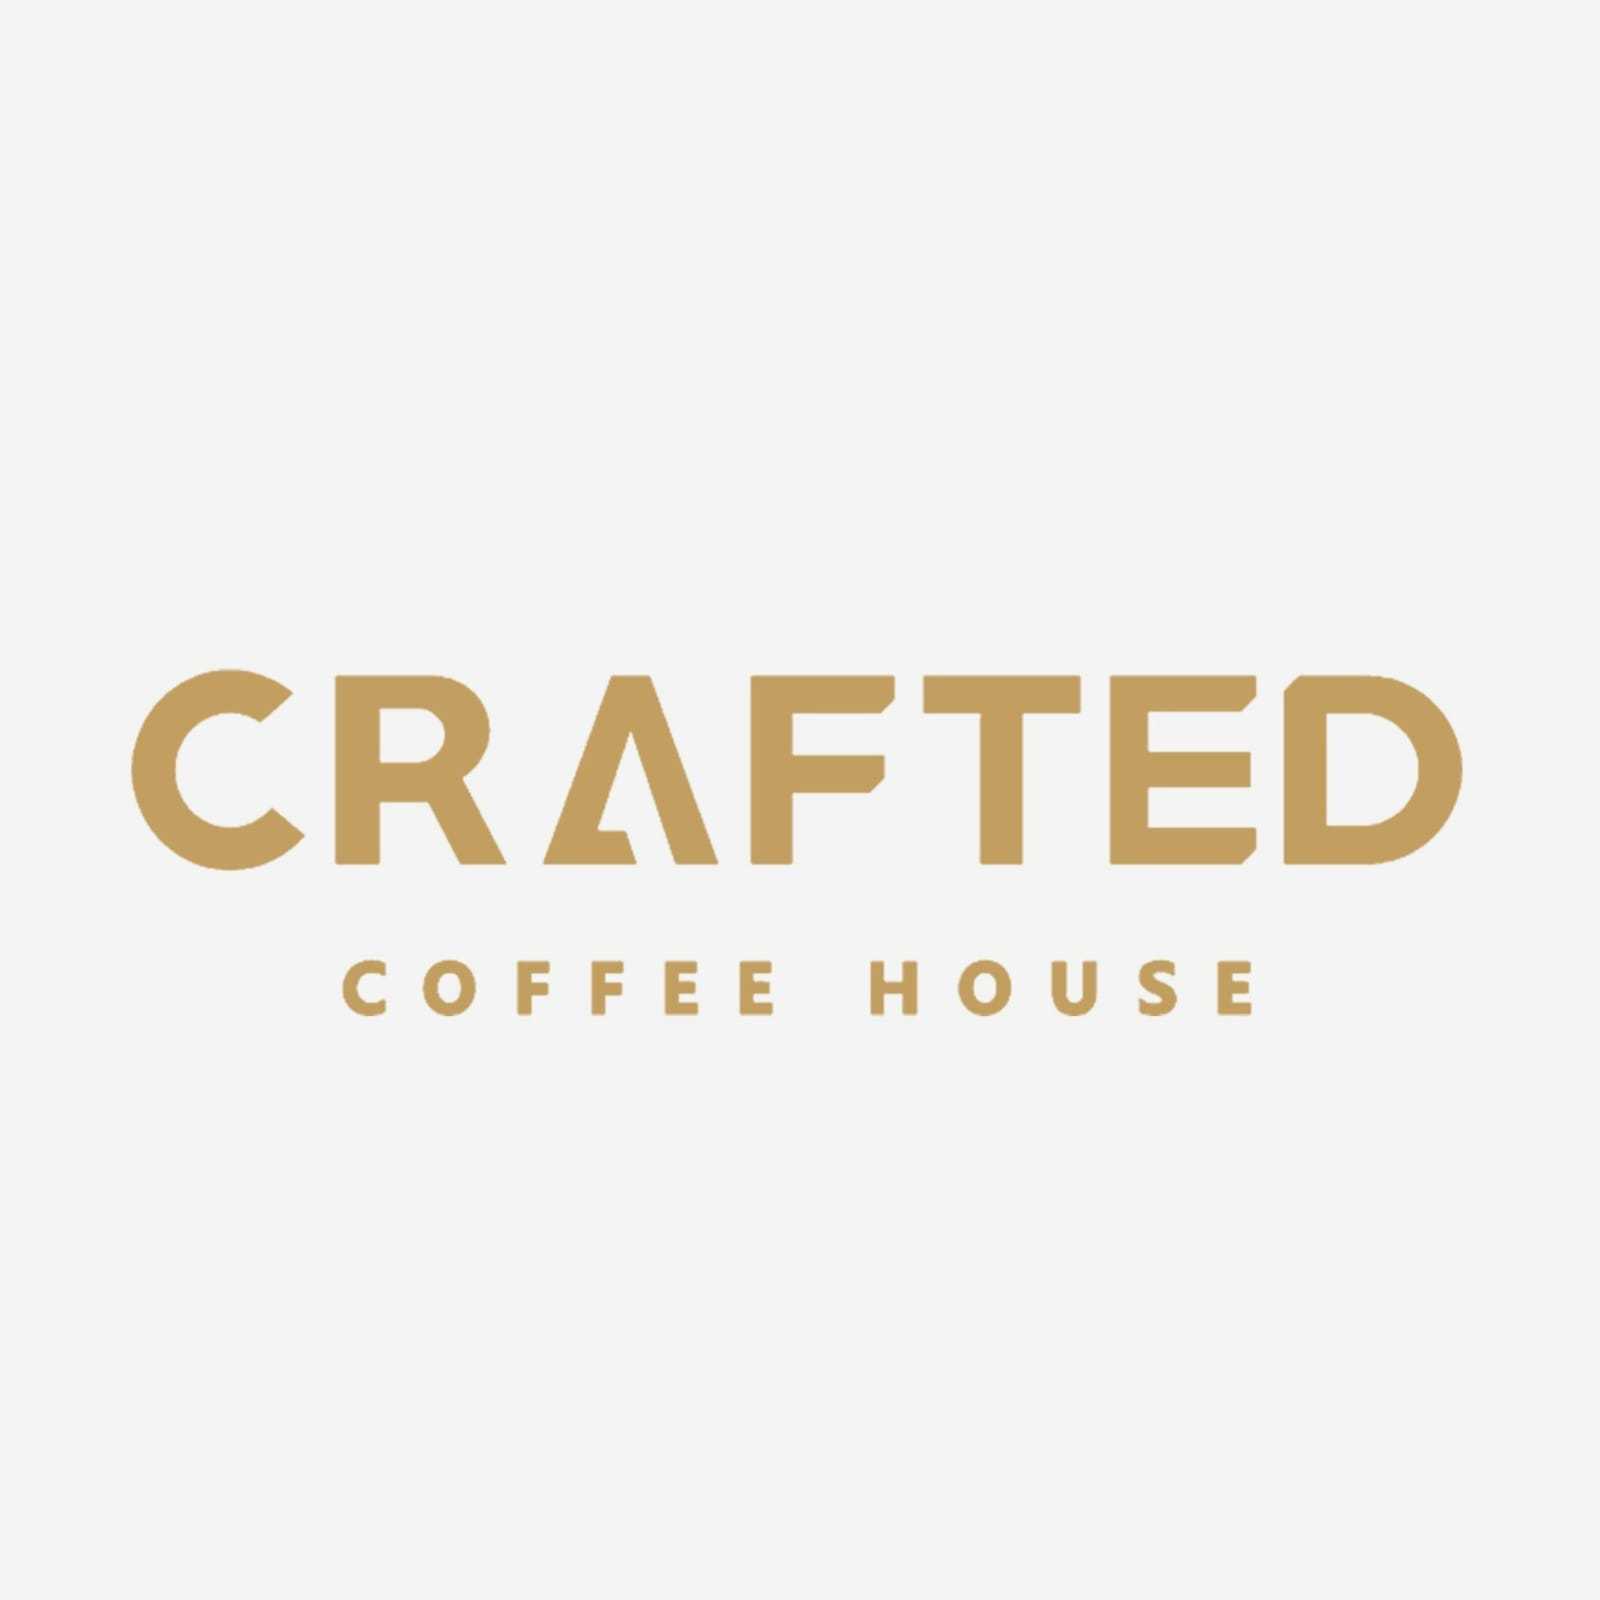 Crafted Coffee House